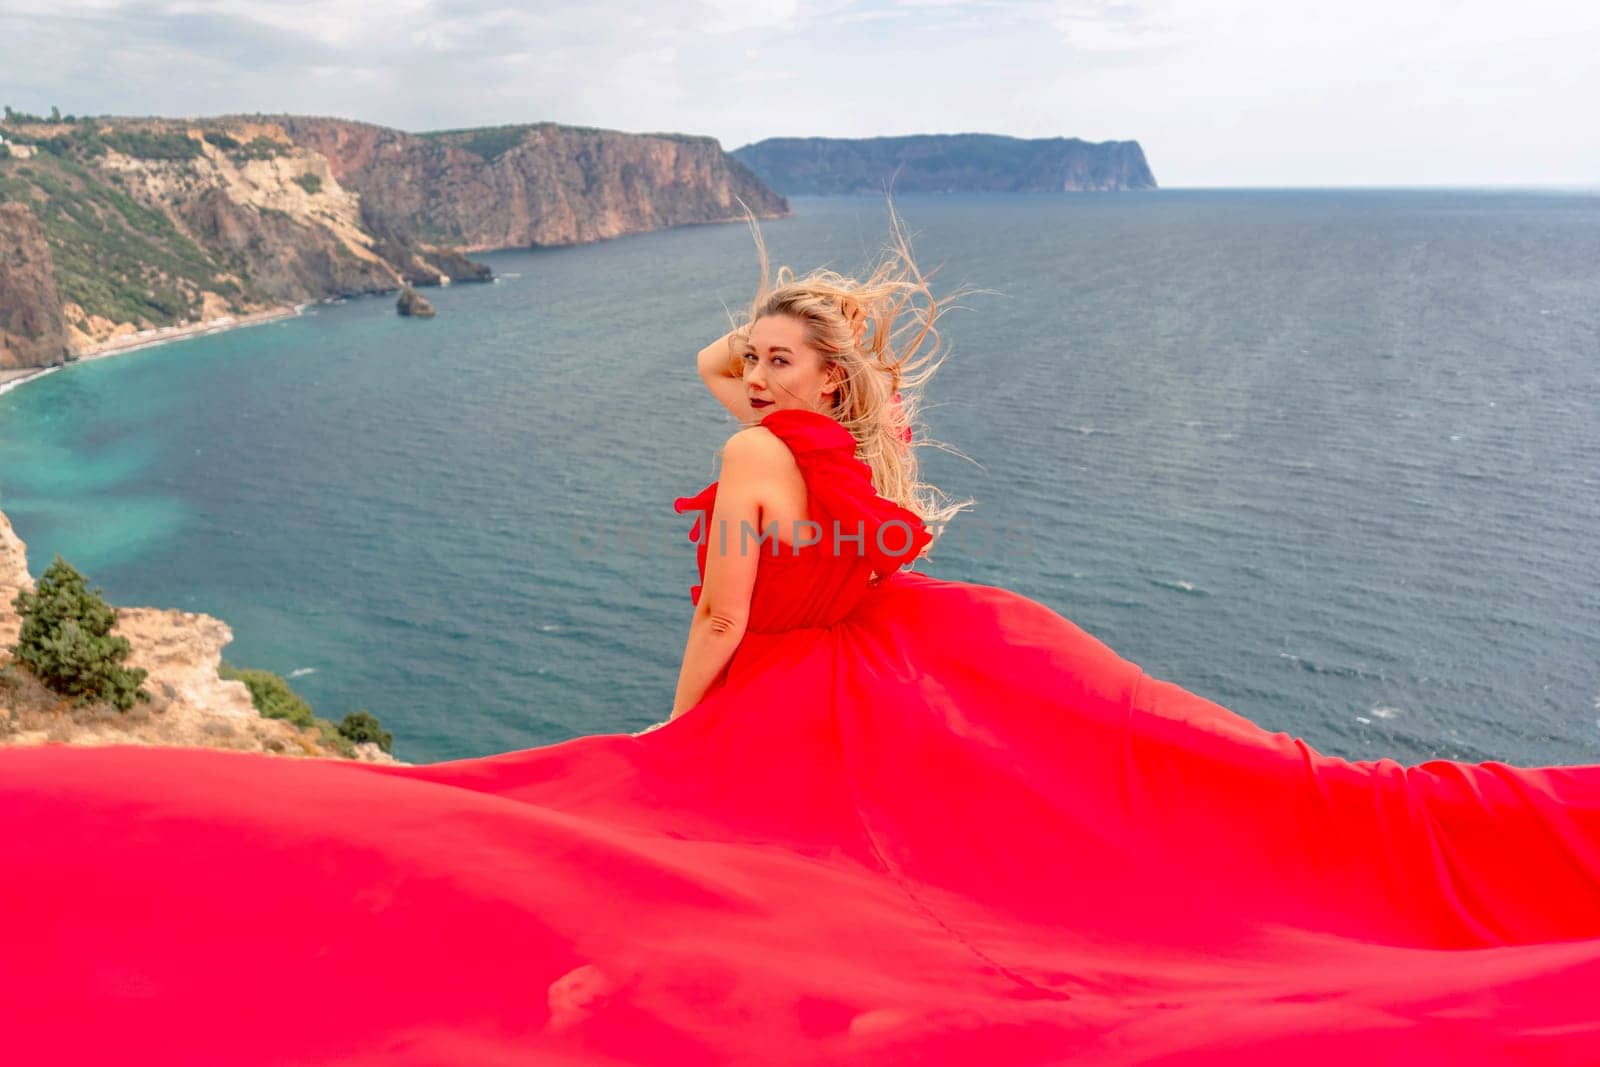 A woman in a red silk dress sits by the ocean with mountains in the background, her dress swaying in the wind. by Matiunina